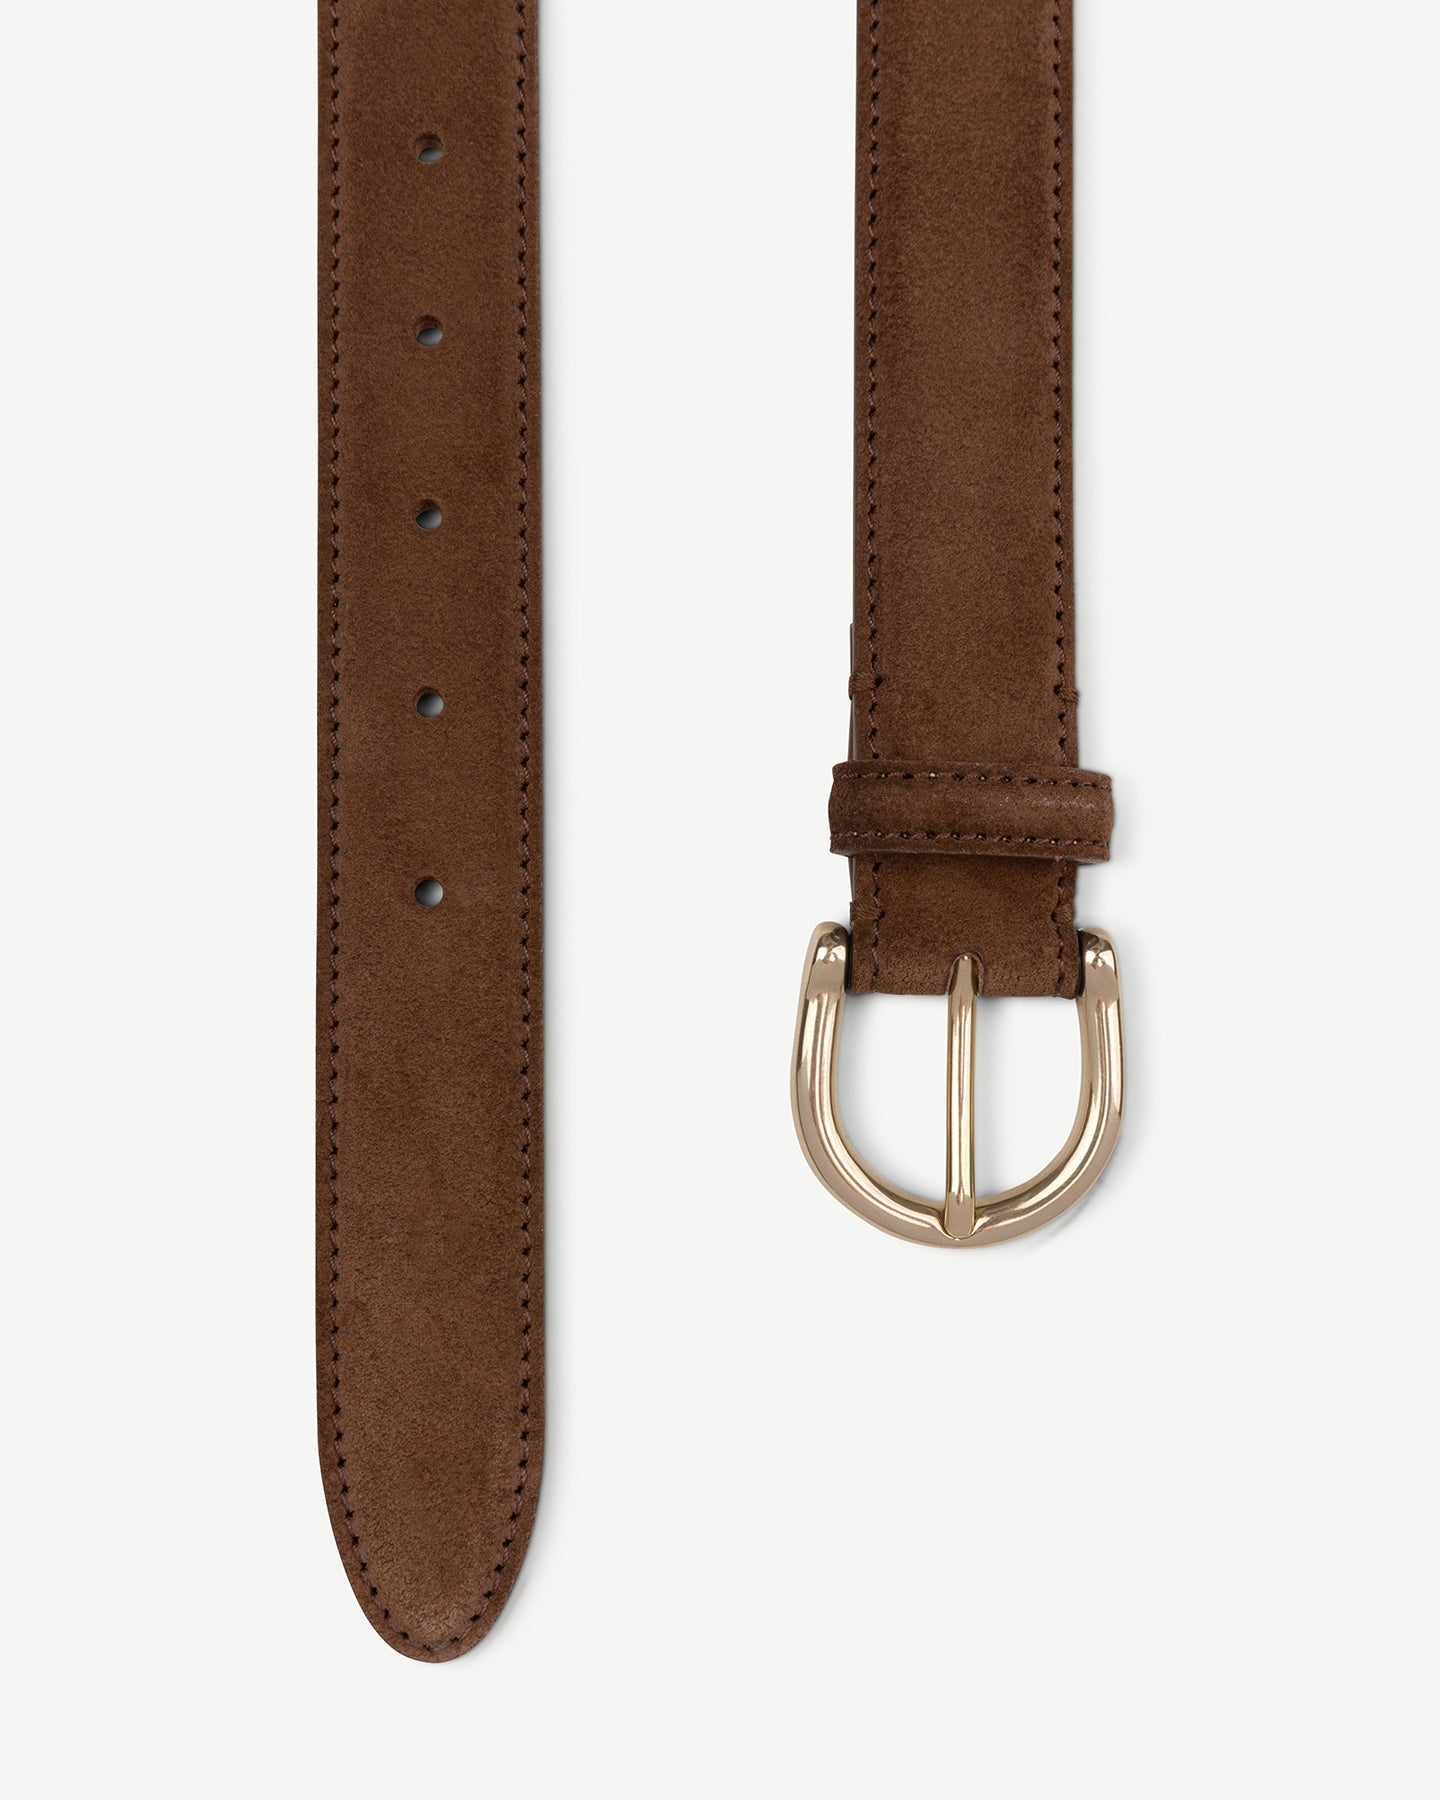 Snuff suede dress belt with solid brass buckle